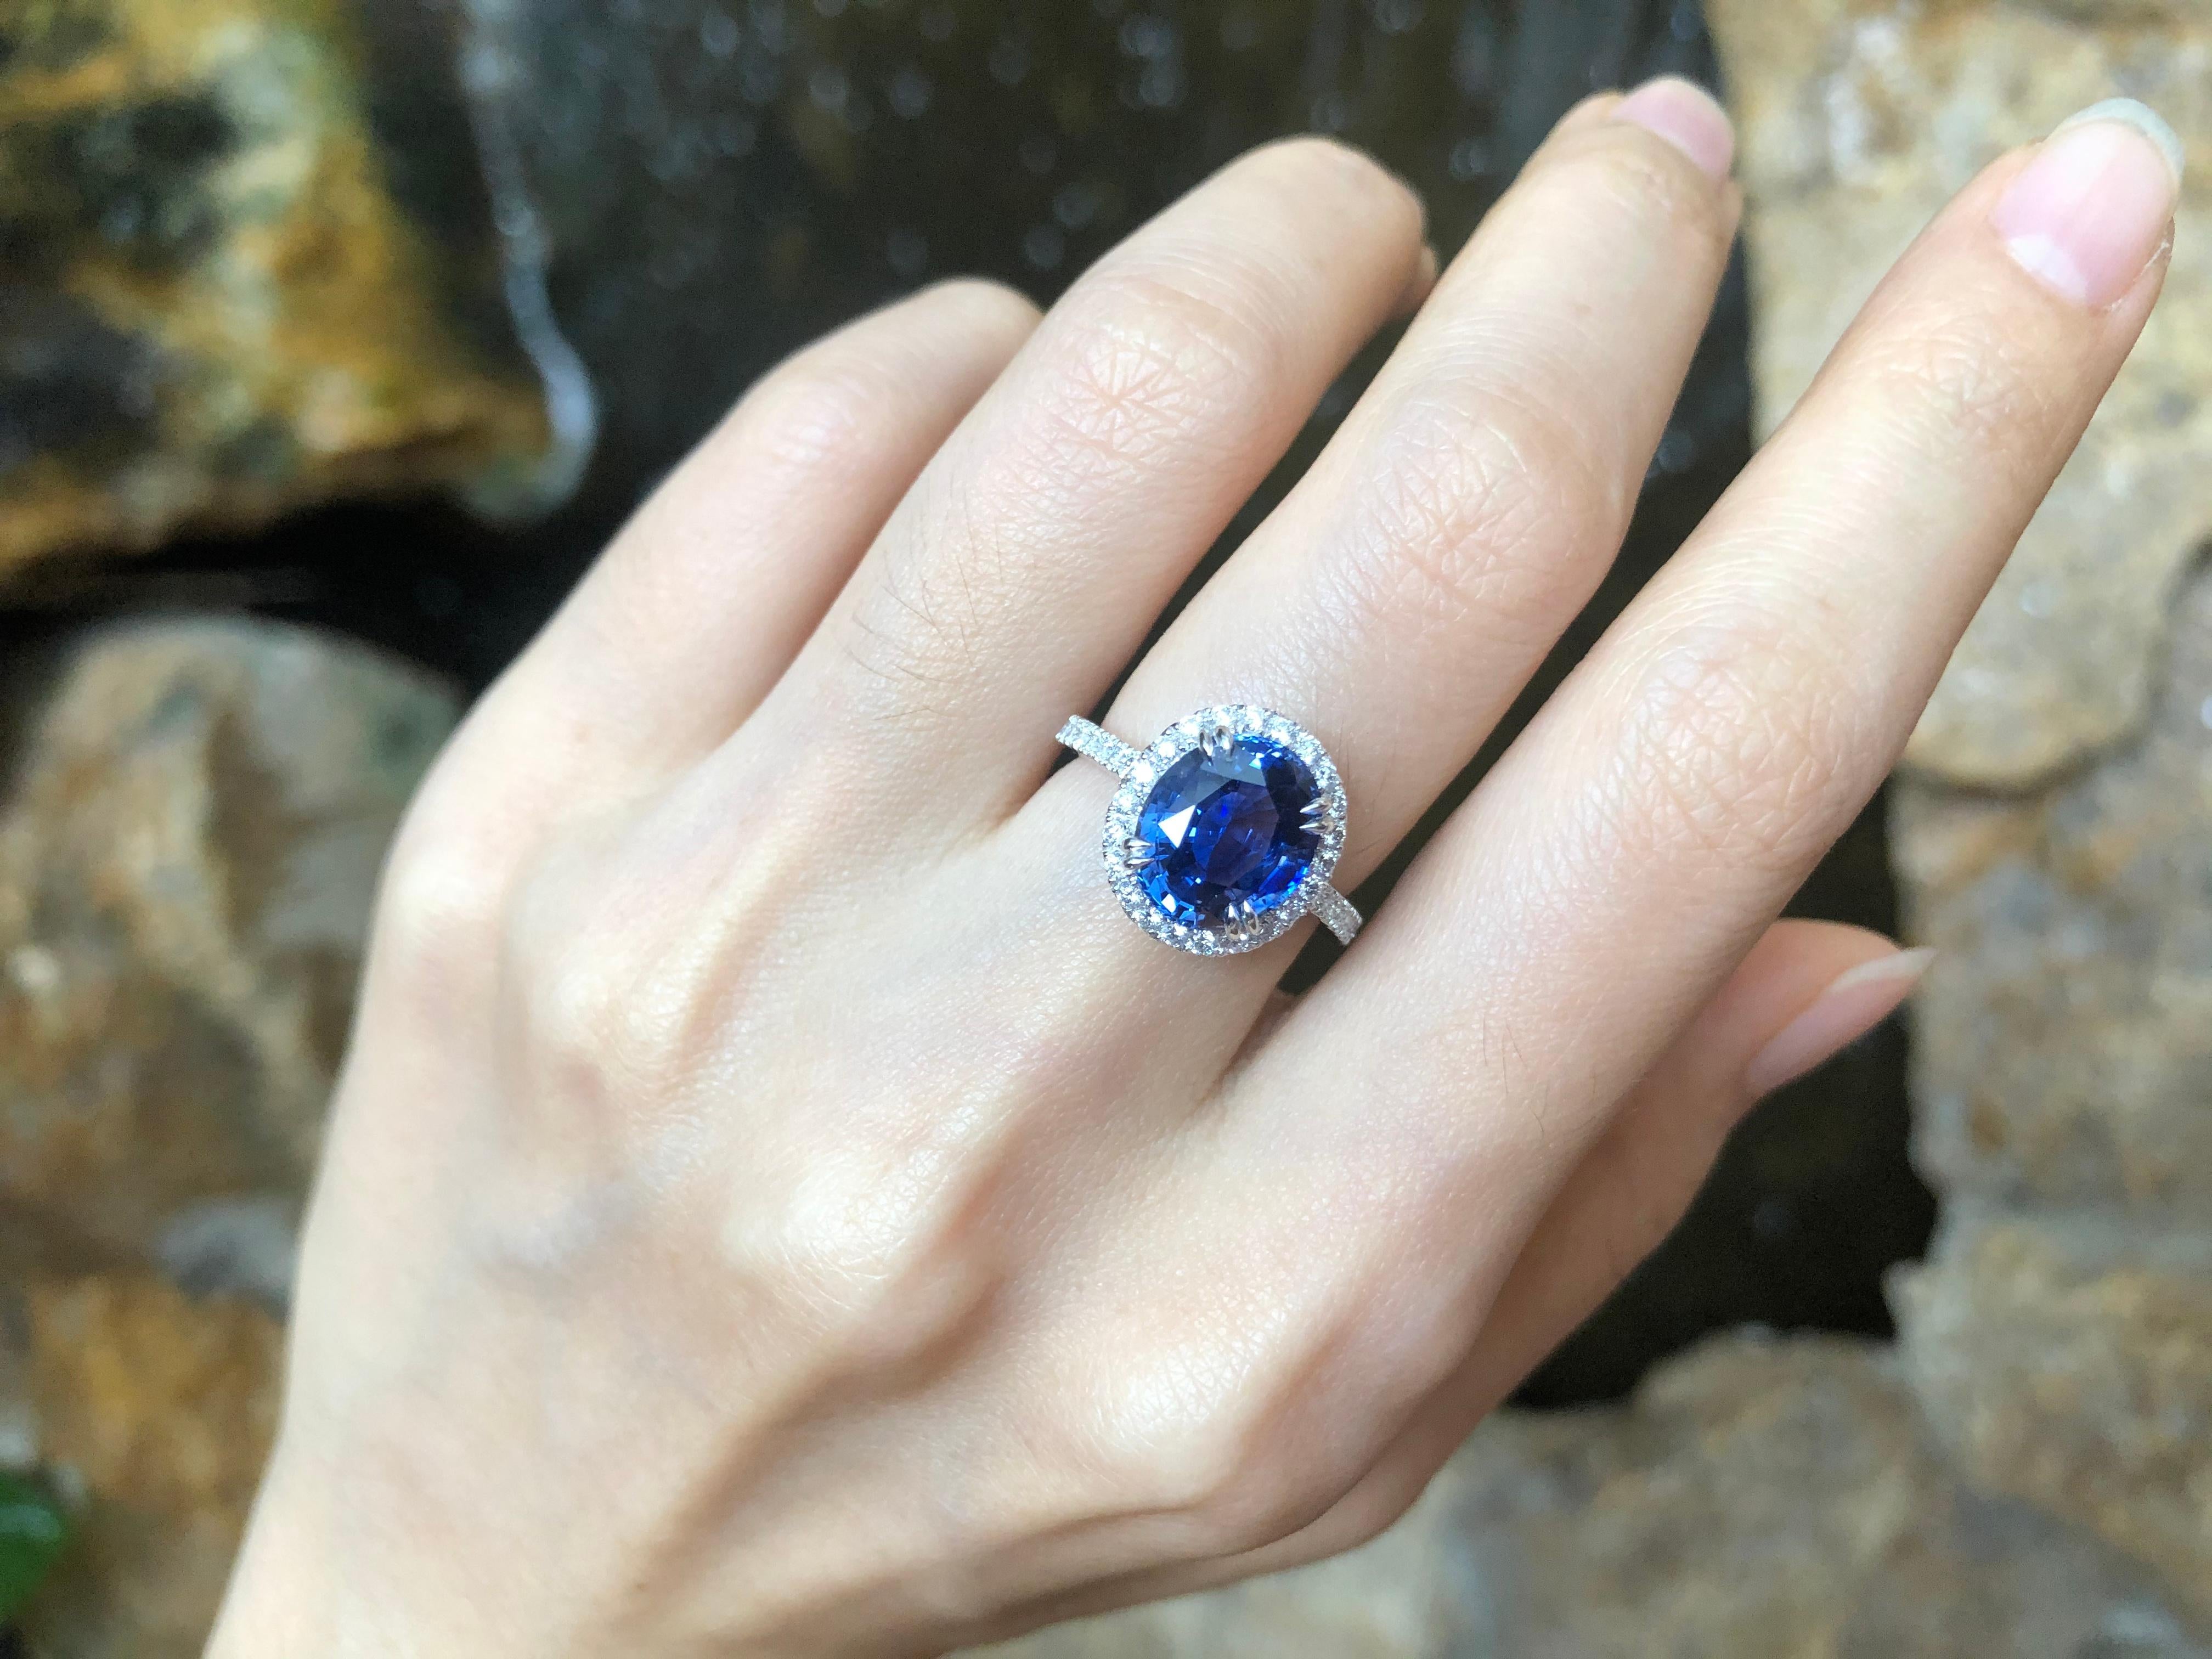 Ceylon Blue Sapphire 3.92 carats with Diamond 0.45 carat Ring set in Platinum 950 Settings
(GIA Certified)

Width:  1.1 cm 
Length: 1.3 cm
Ring Size: 51
Total Weight: 7.44 grams

